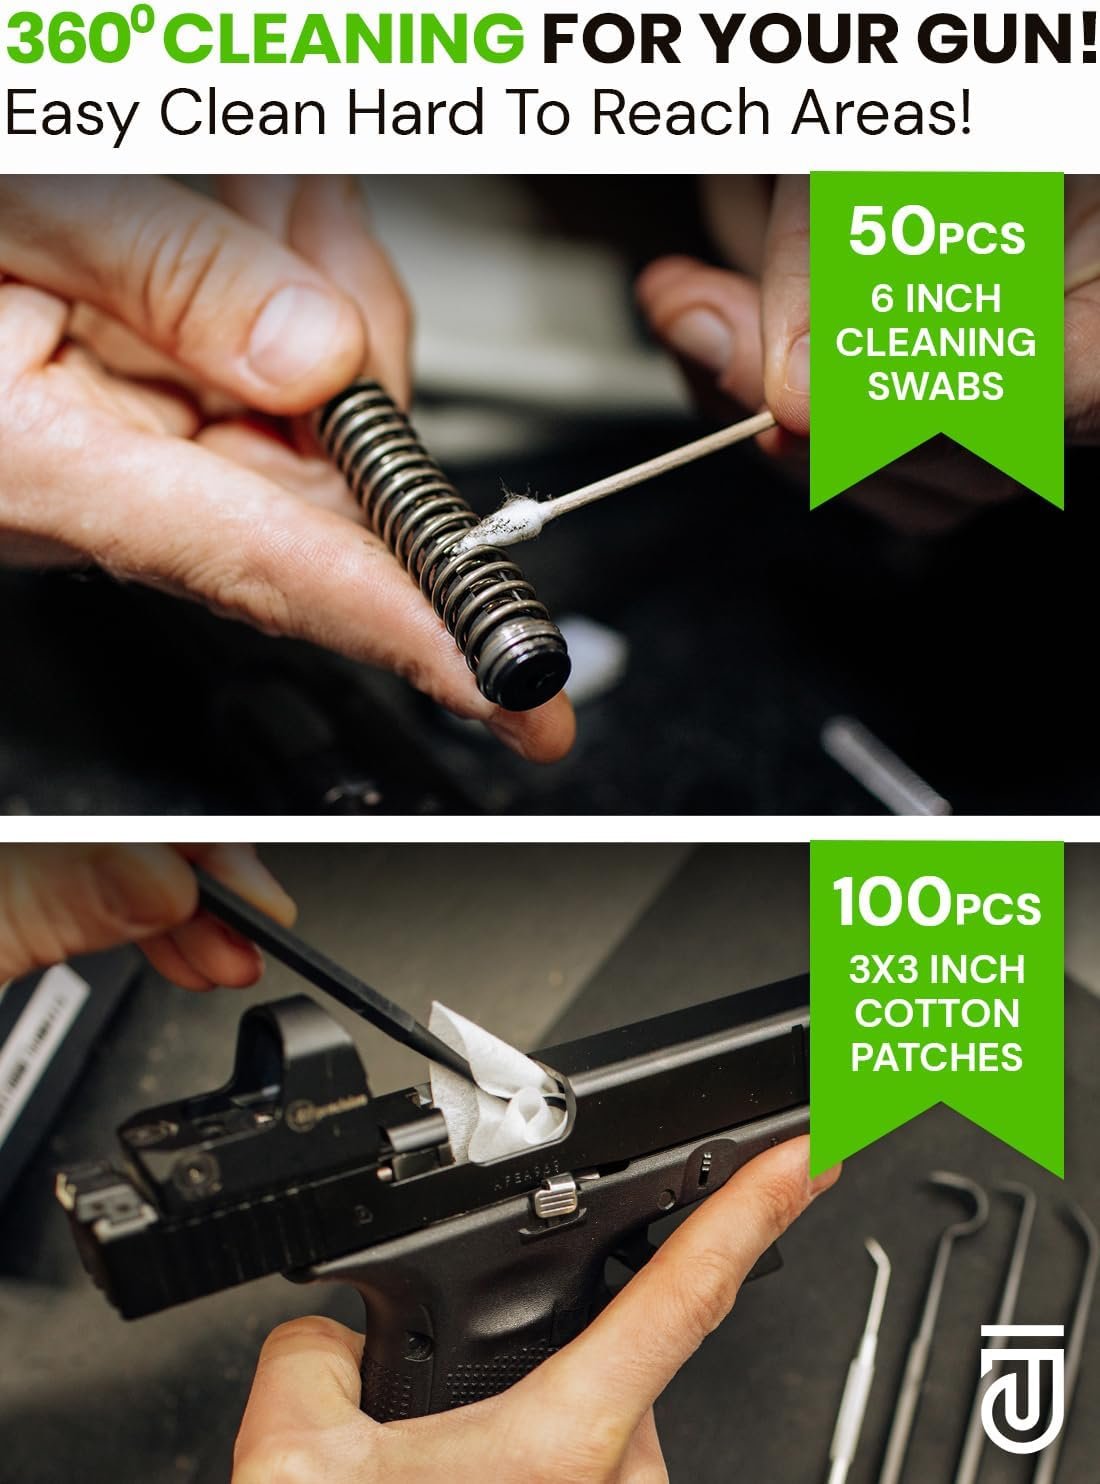 Bore Cleaner Gun Cleaning Kit Review